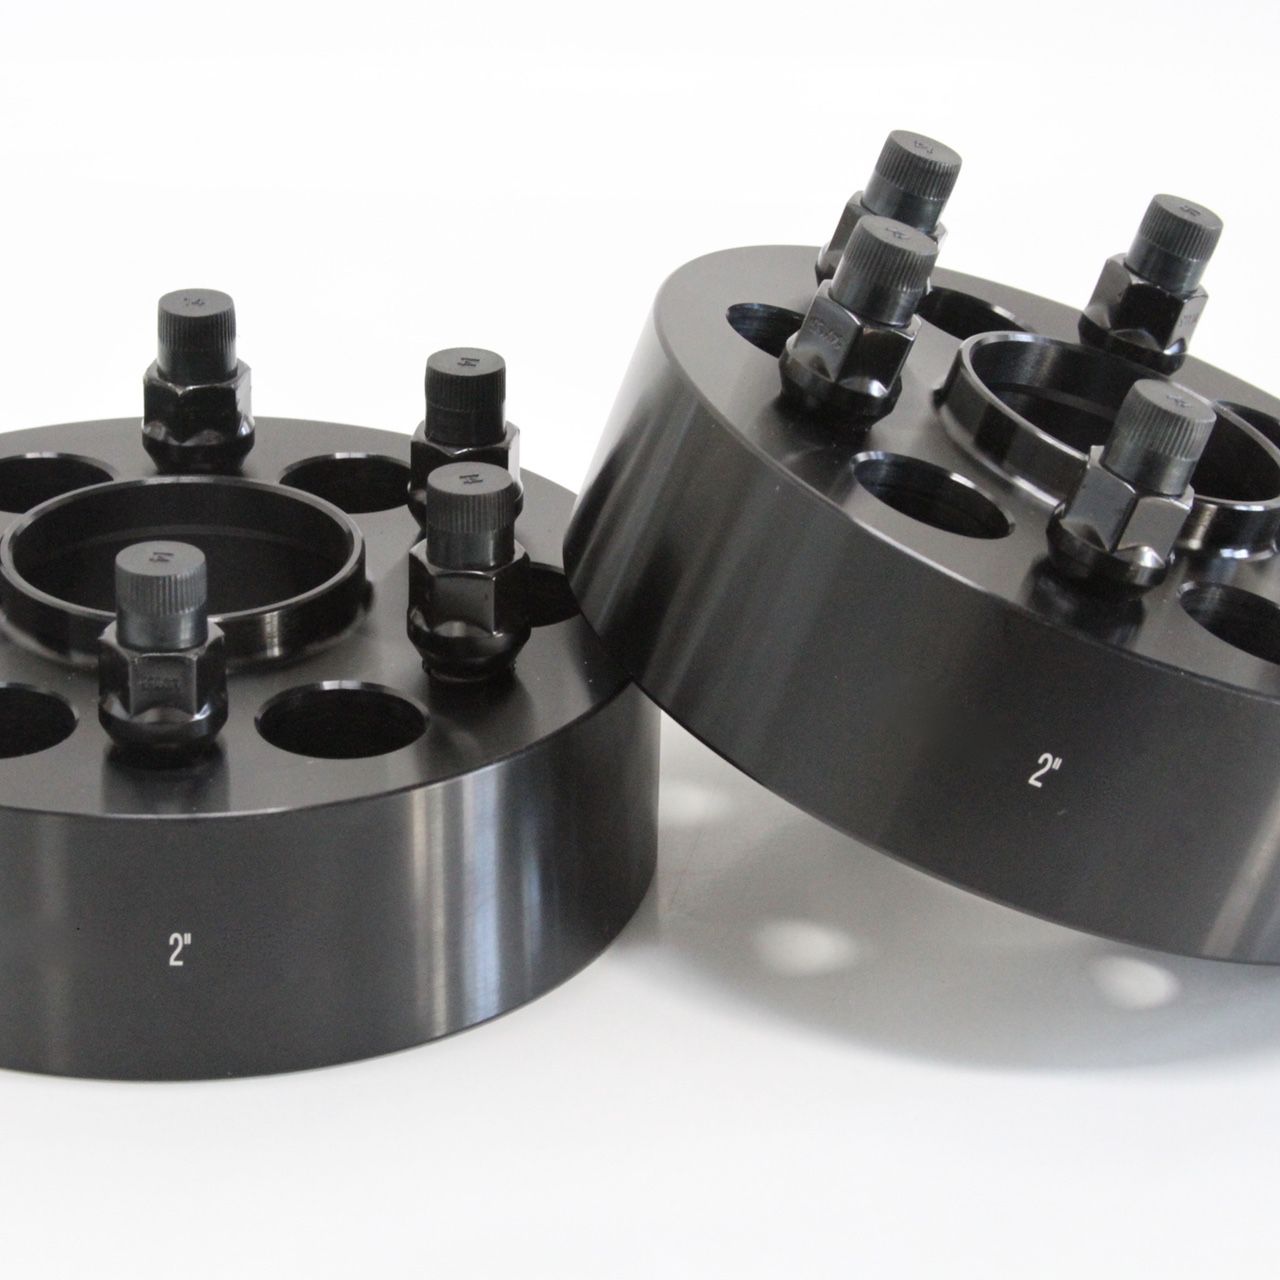 2” Jeep Hub-Centric Wheel Spacer / Adapter